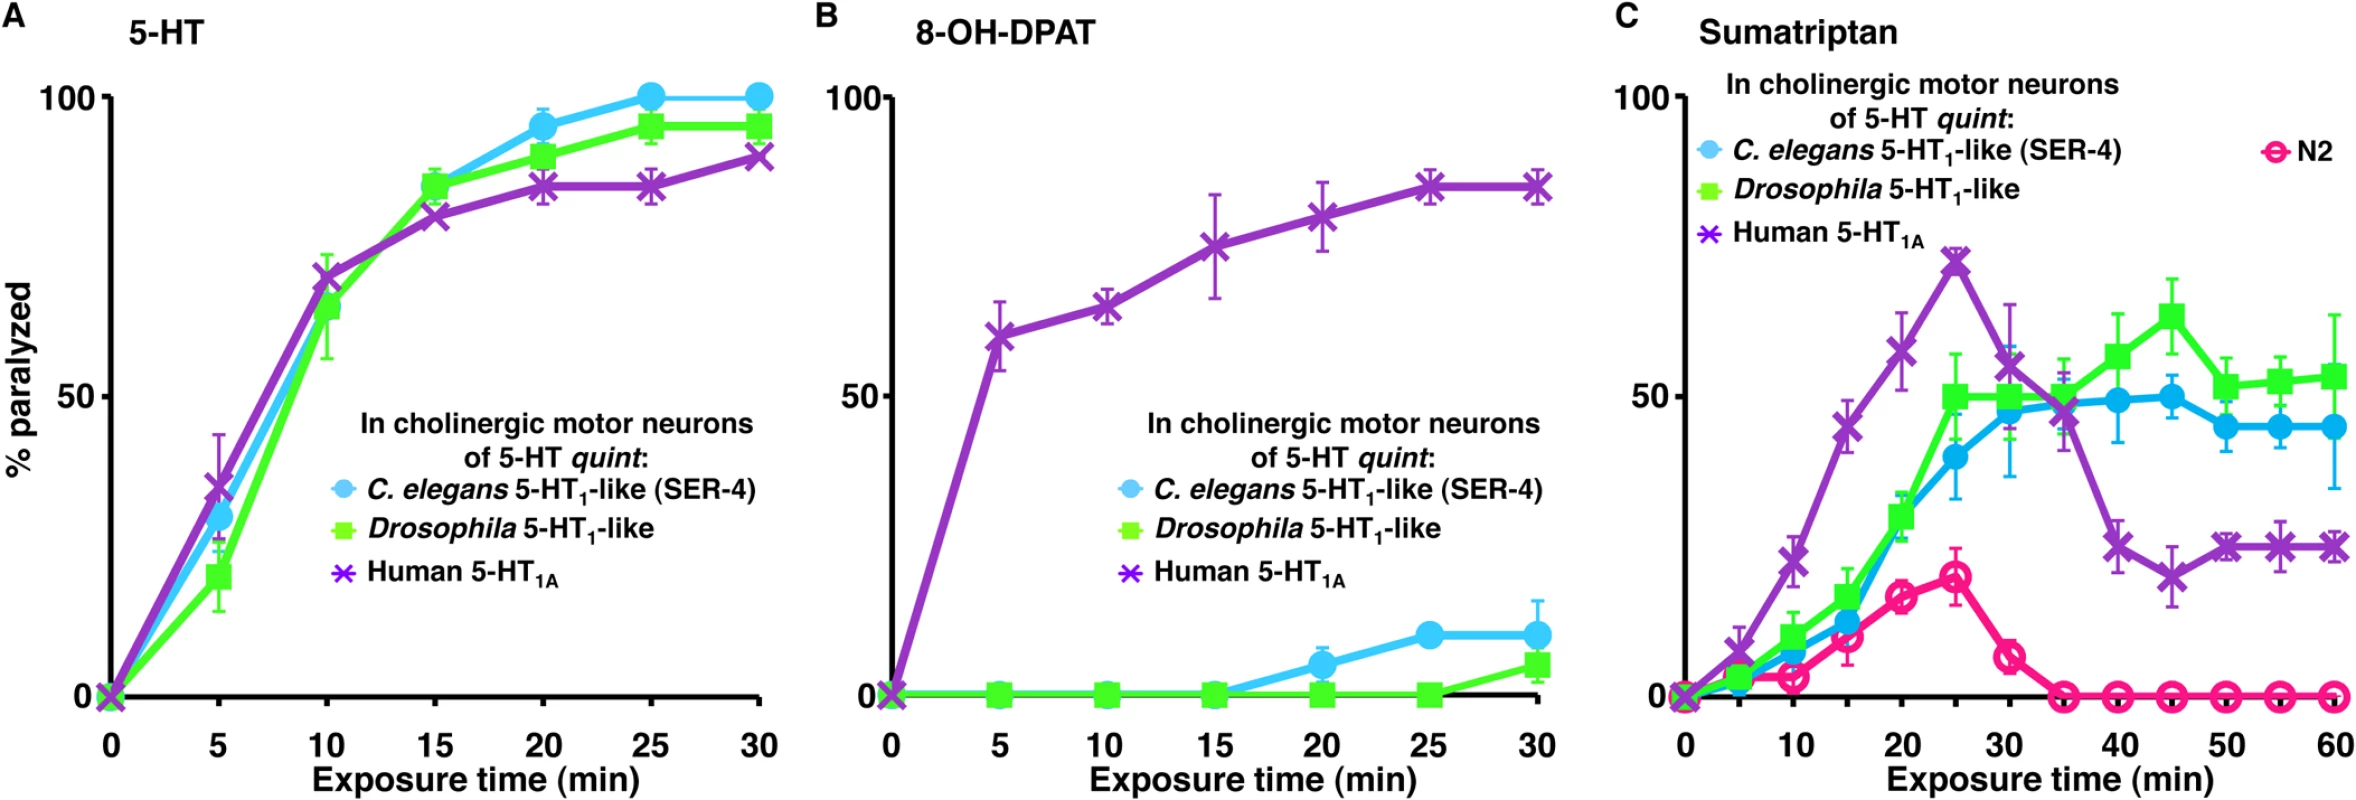 5-HT and 5-HT receptor agonists selectively paralyze <i>C</i>. <i>elegans</i> 5-HT receptor mutant animals expressing nematode, insect or human 5-HT<sub>1</sub>-like receptors in the cholinergic motor neurons.